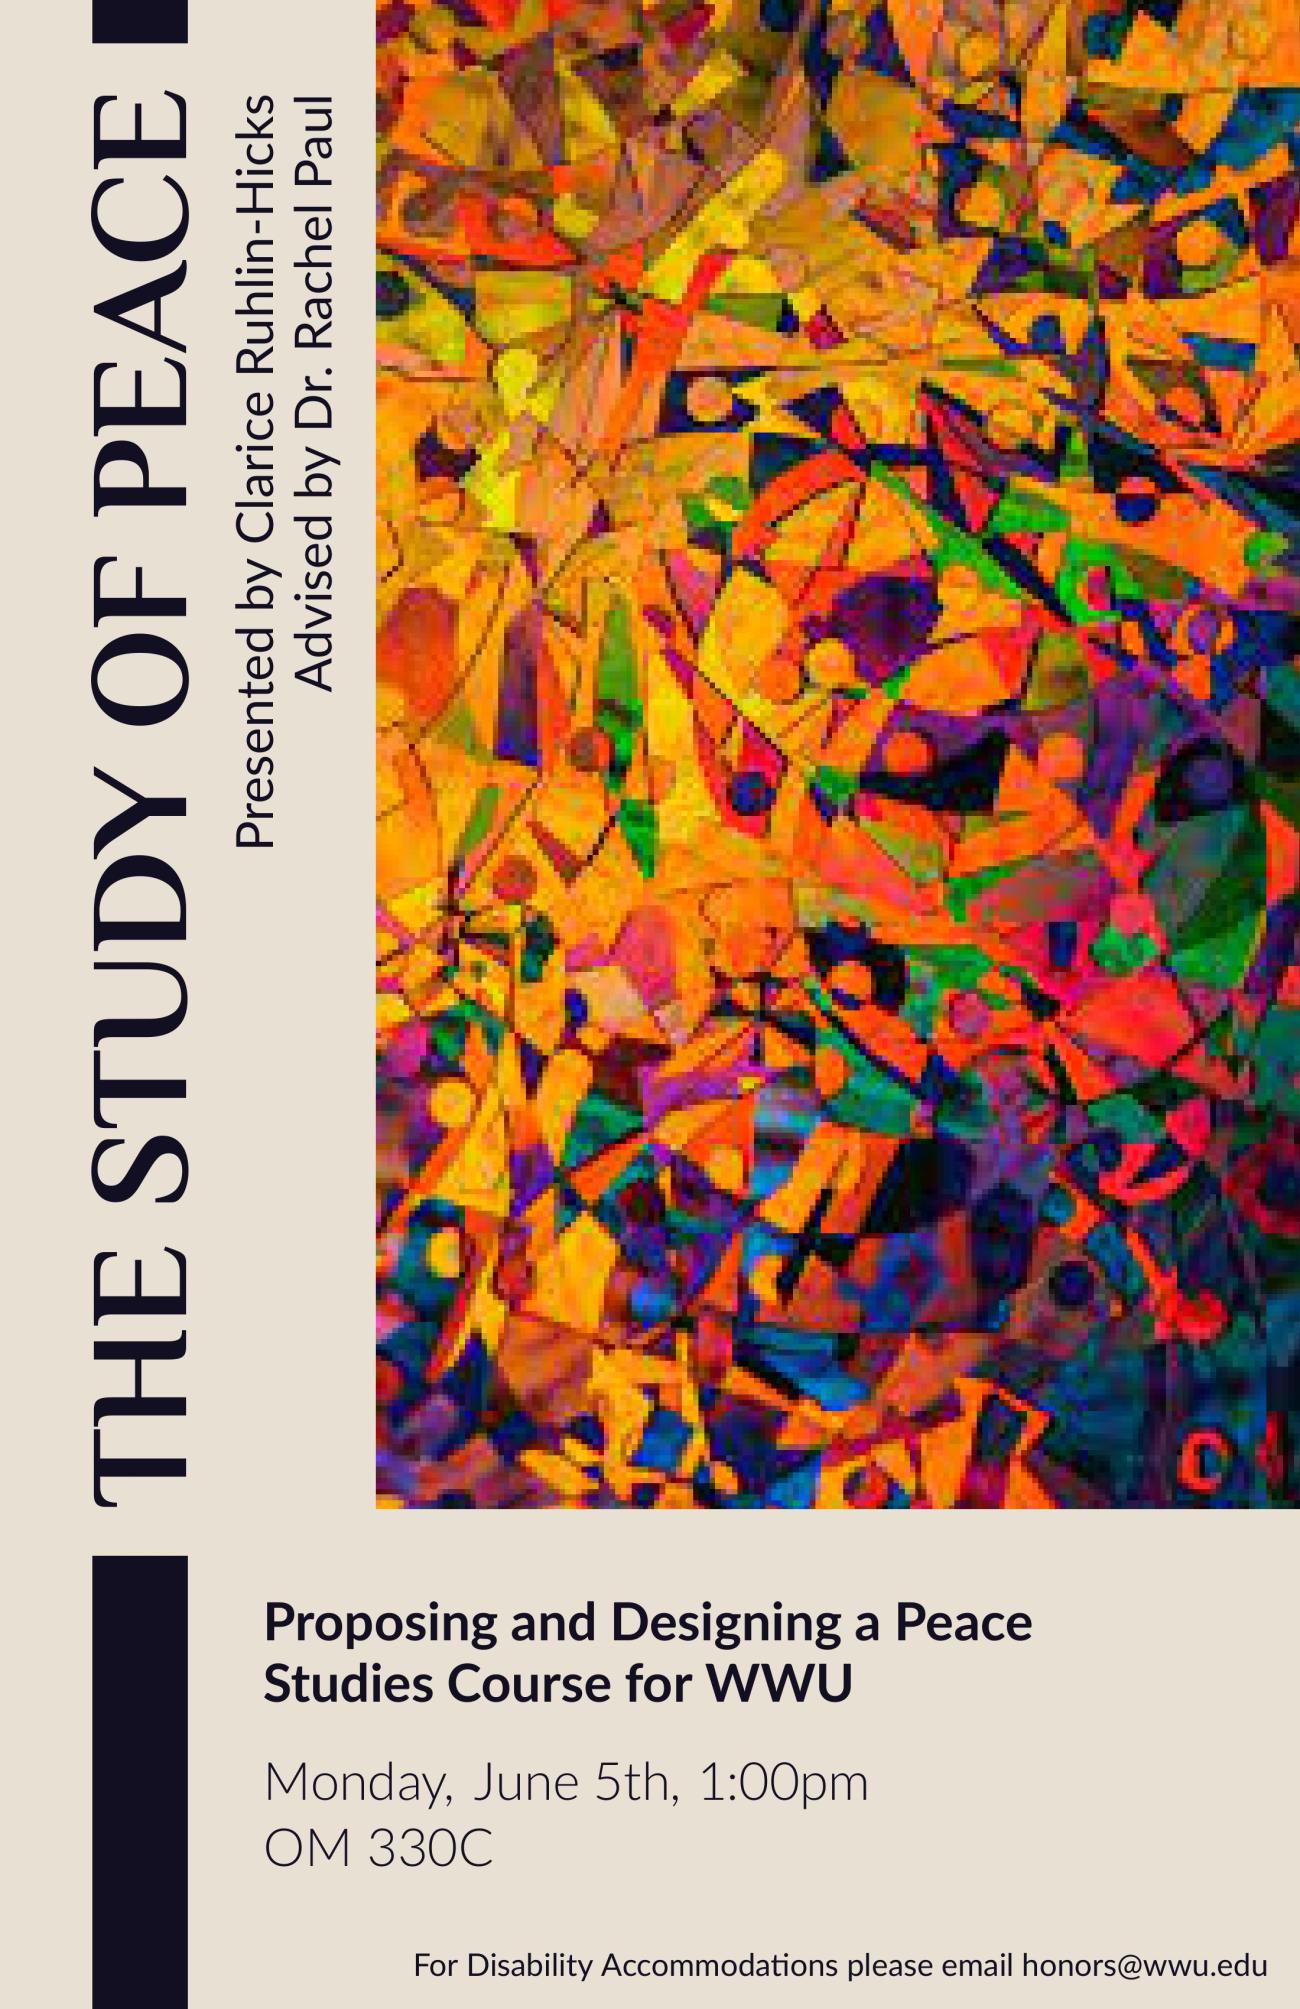 A poster with a light brown background and vertical black text that reads, “The Study of Peace. Clarice Ruhlin-Hicks. Advised by Dr. Rachel Paul.” Adjacent to this is an abstract art piece with orange, blue, purple, red, and green colors and various shapes. Under this art there is text that reads, “Proposing and Designing a Peace Studies Course for WWU. Monday, June 5th, 1:00pm. OM 330C. For Disability Accommodations please email honors@wwu.edu.”